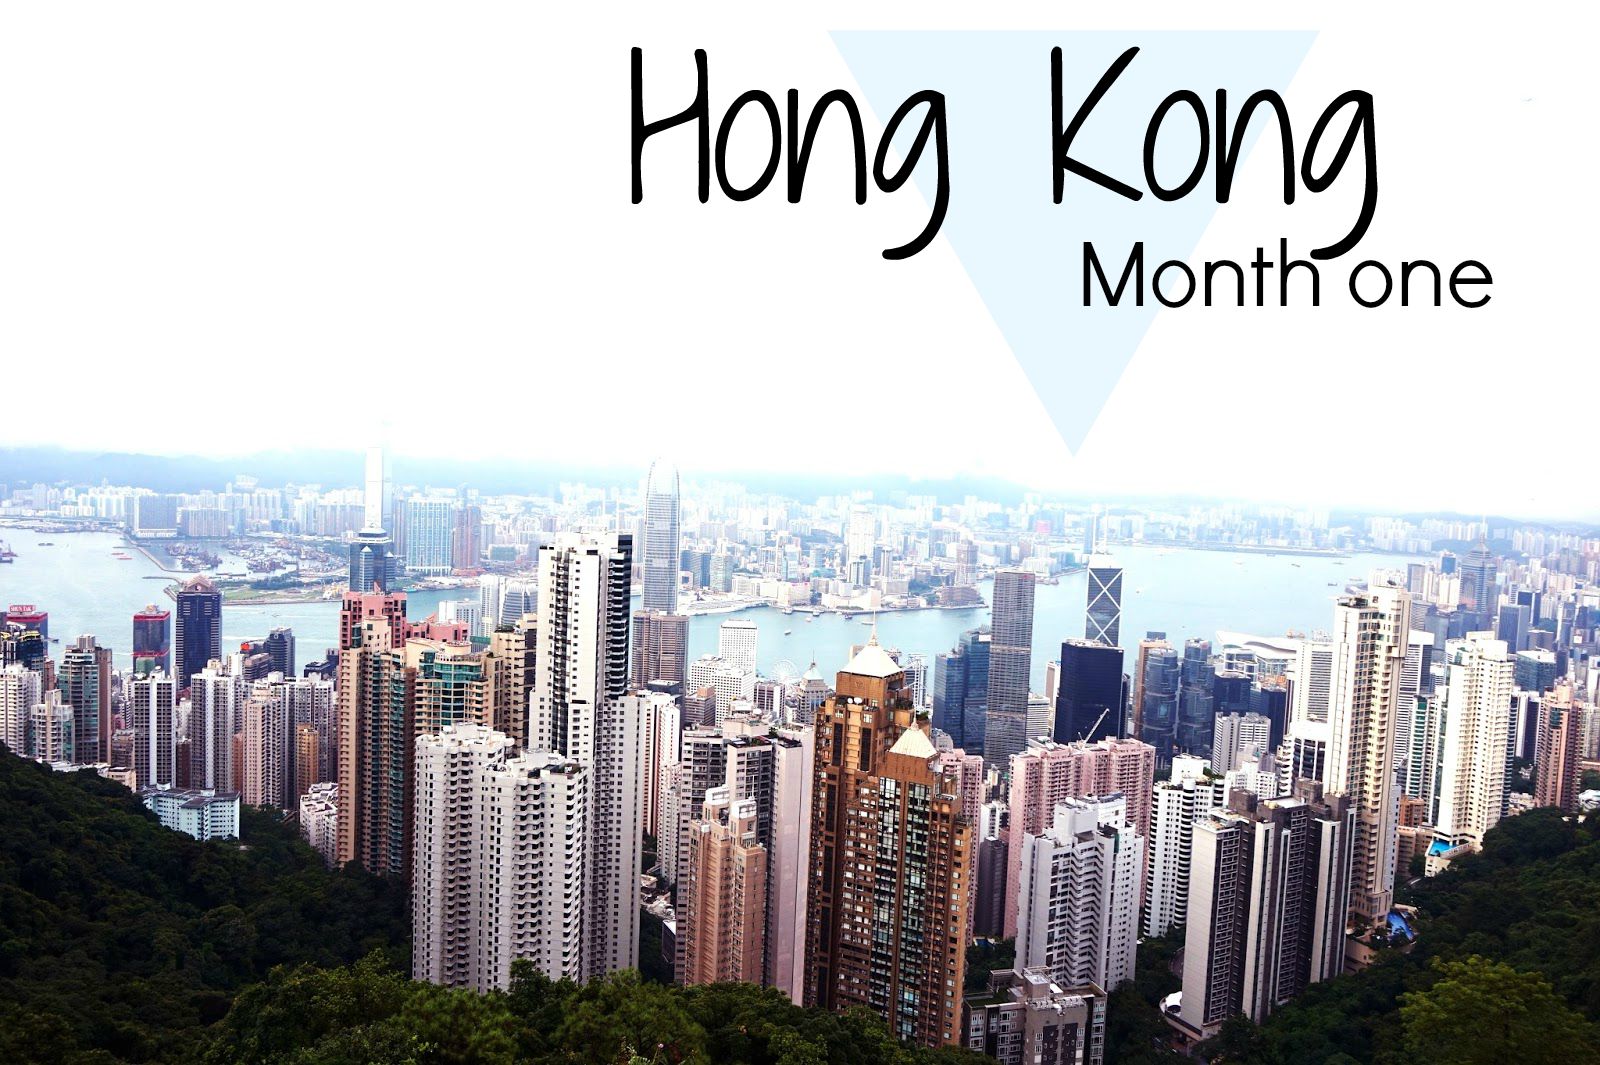 Monthly roundup // Hong Kong month 1